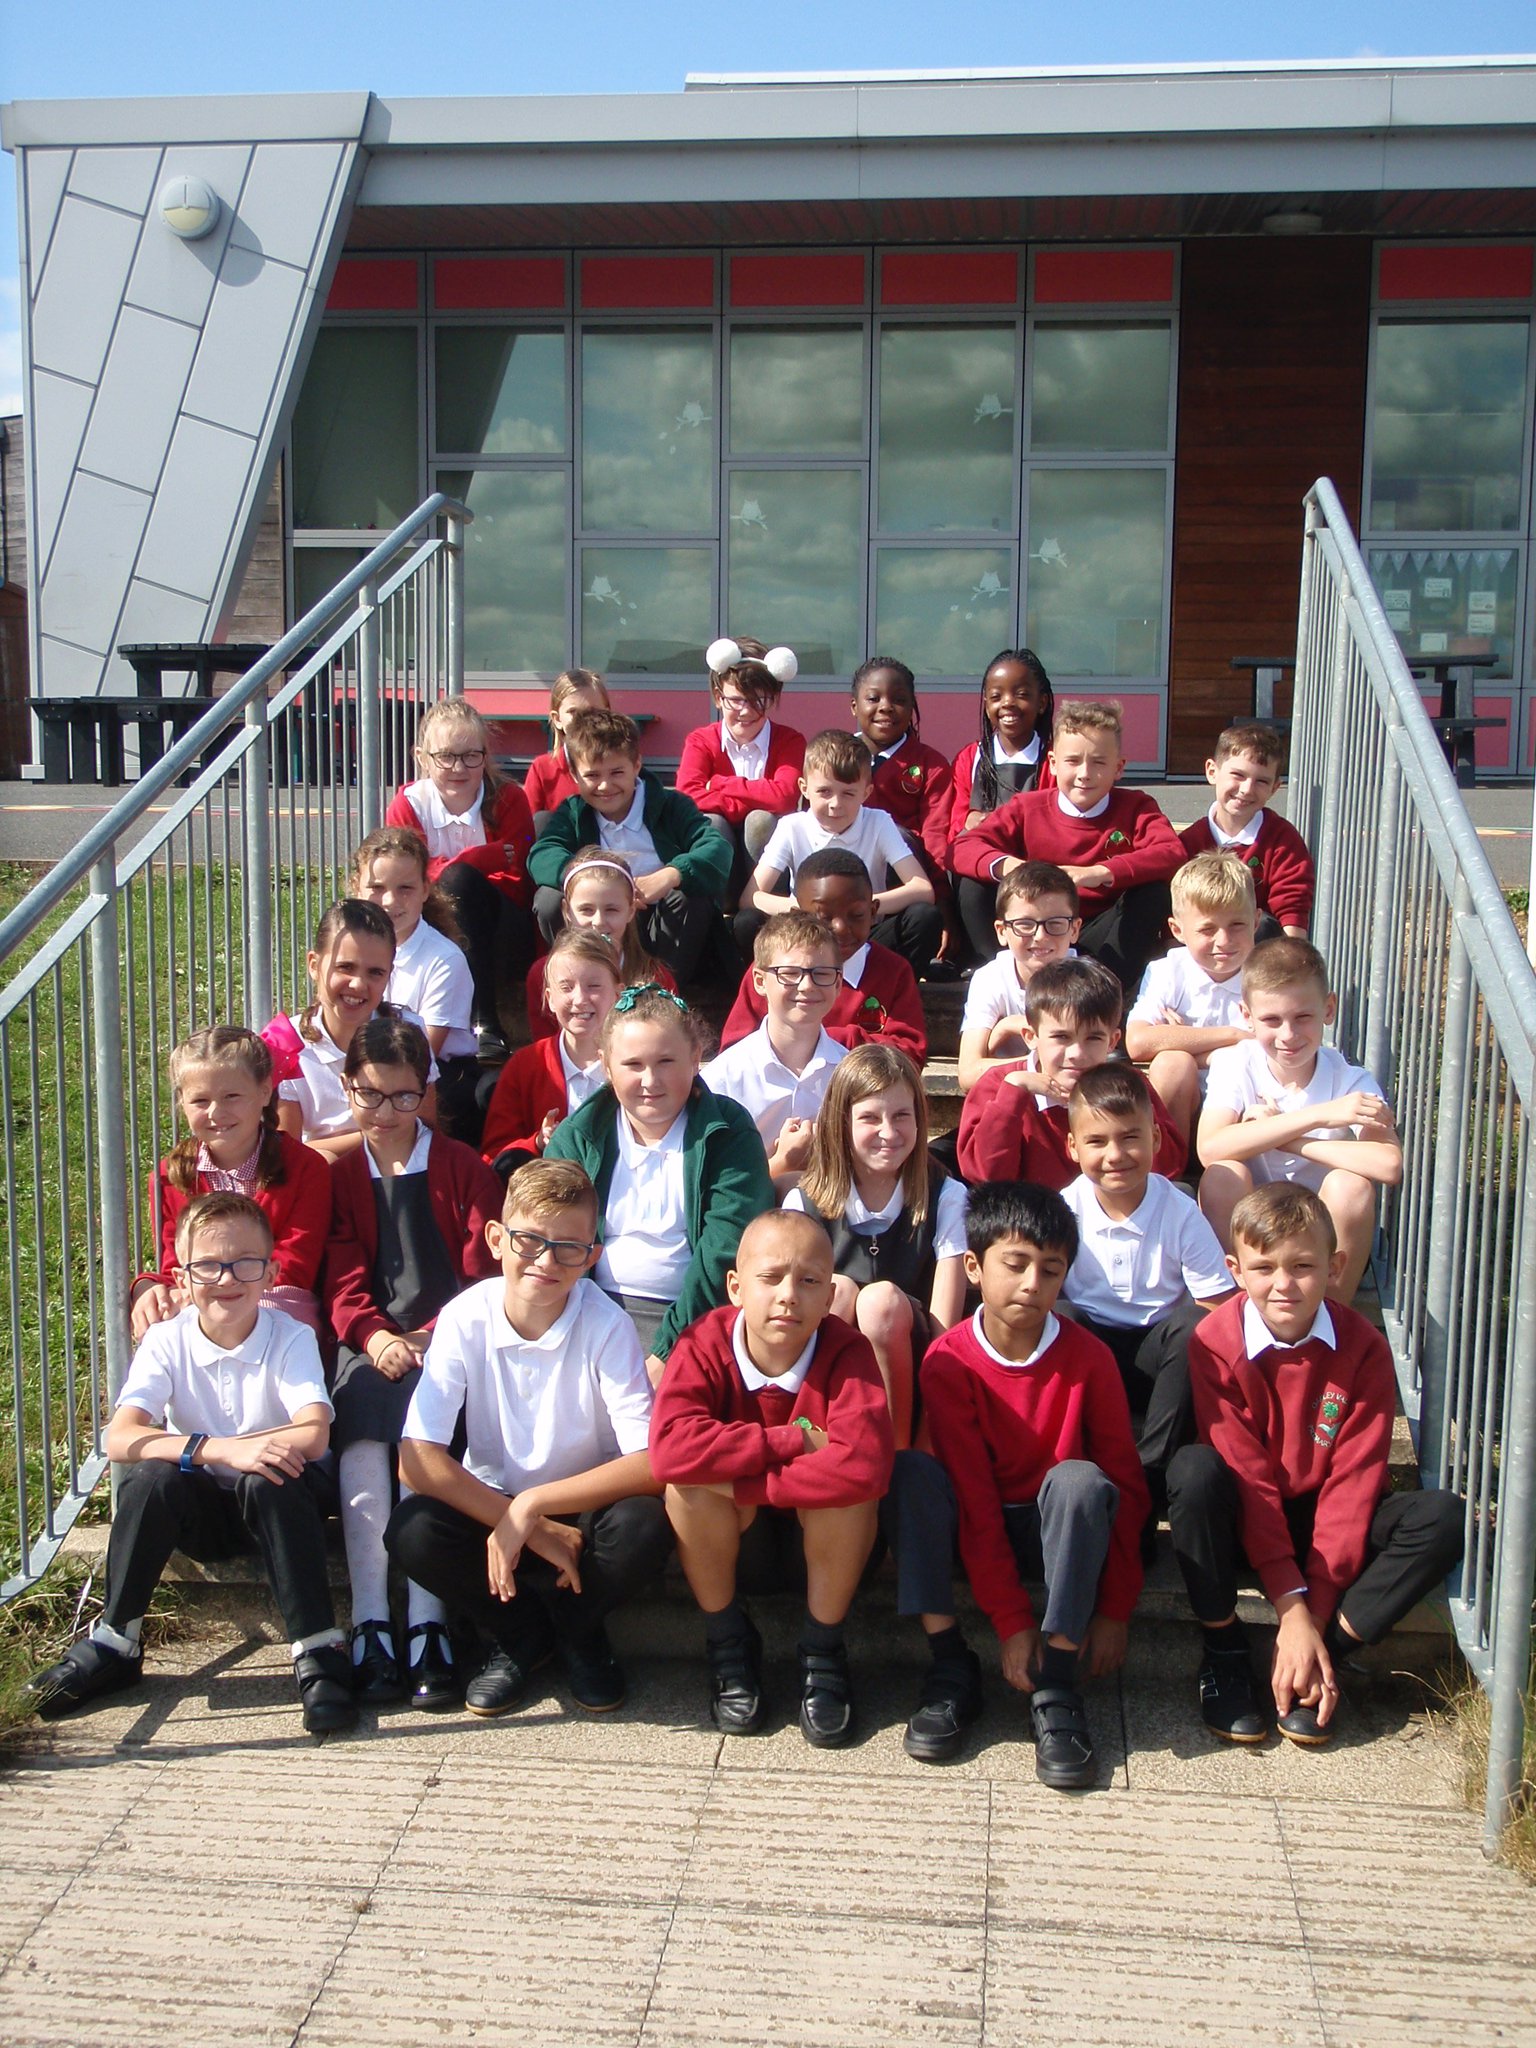 Oakley Vale Primary on Twitter: class are having great first day back at school and are looking forward to fantastic year😀#ovps #stags #year5 https://t.co/E7brUt19IA" / Twitter